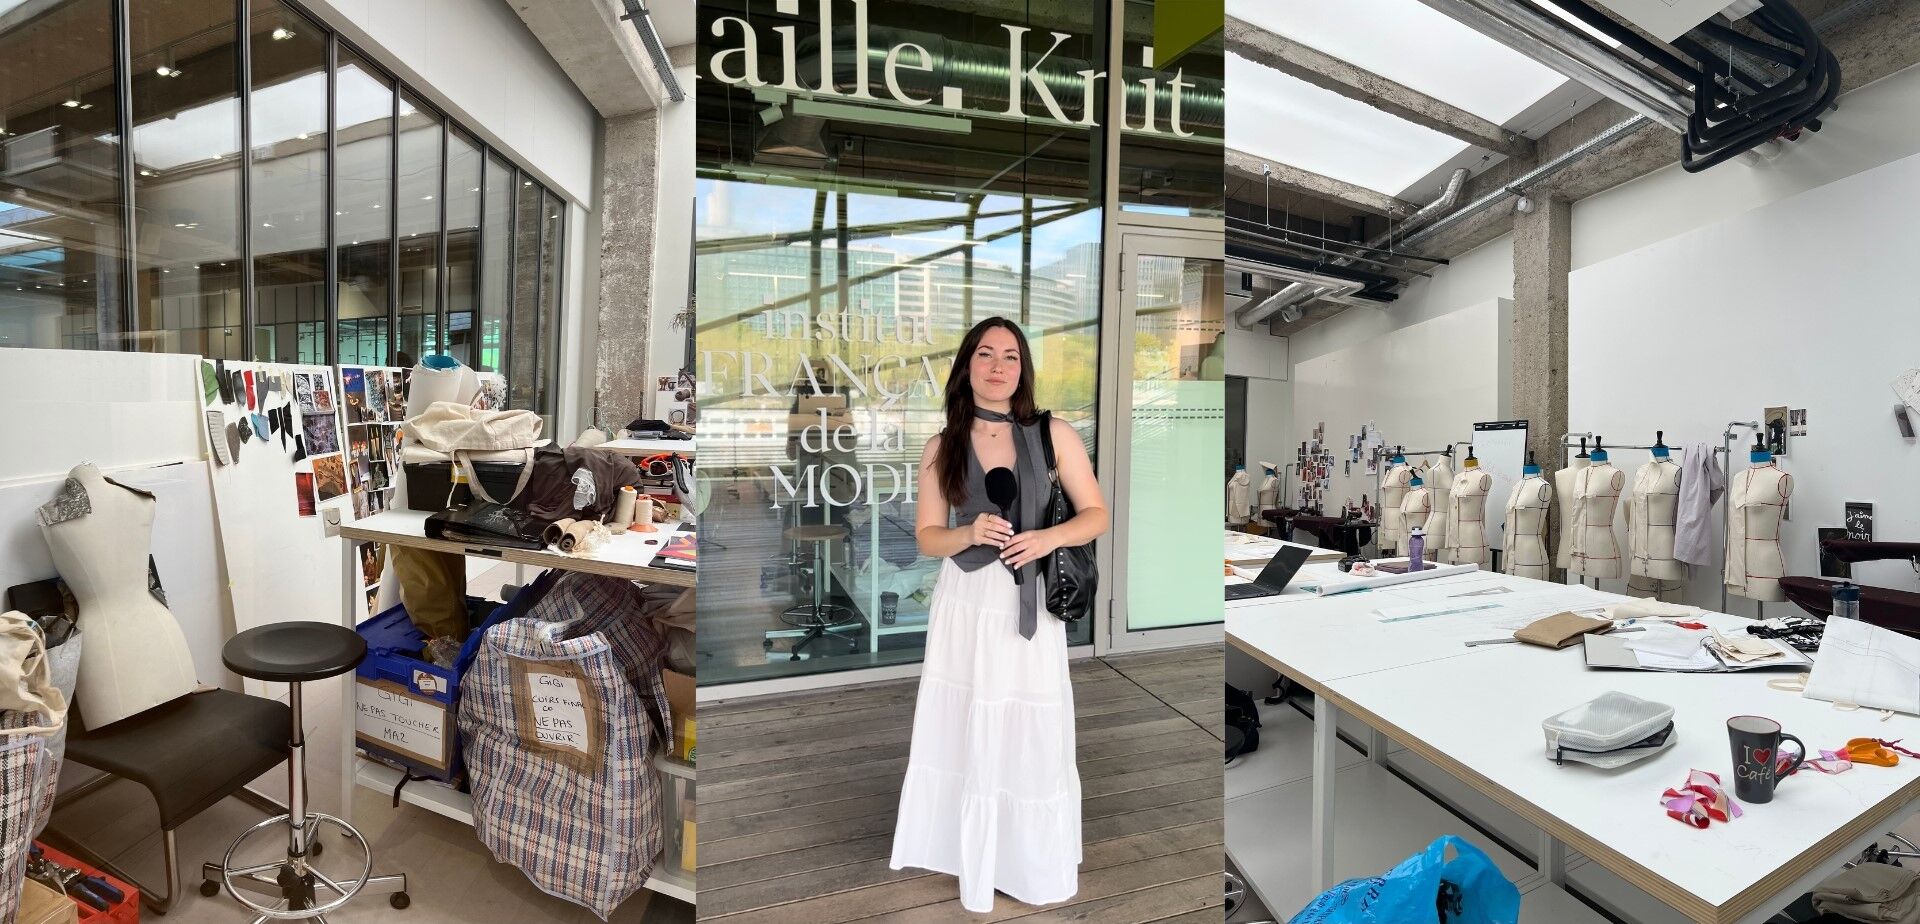  A three-part collage of a fashion studio: a busy work desk, a designer posing, and a row of dress forms.